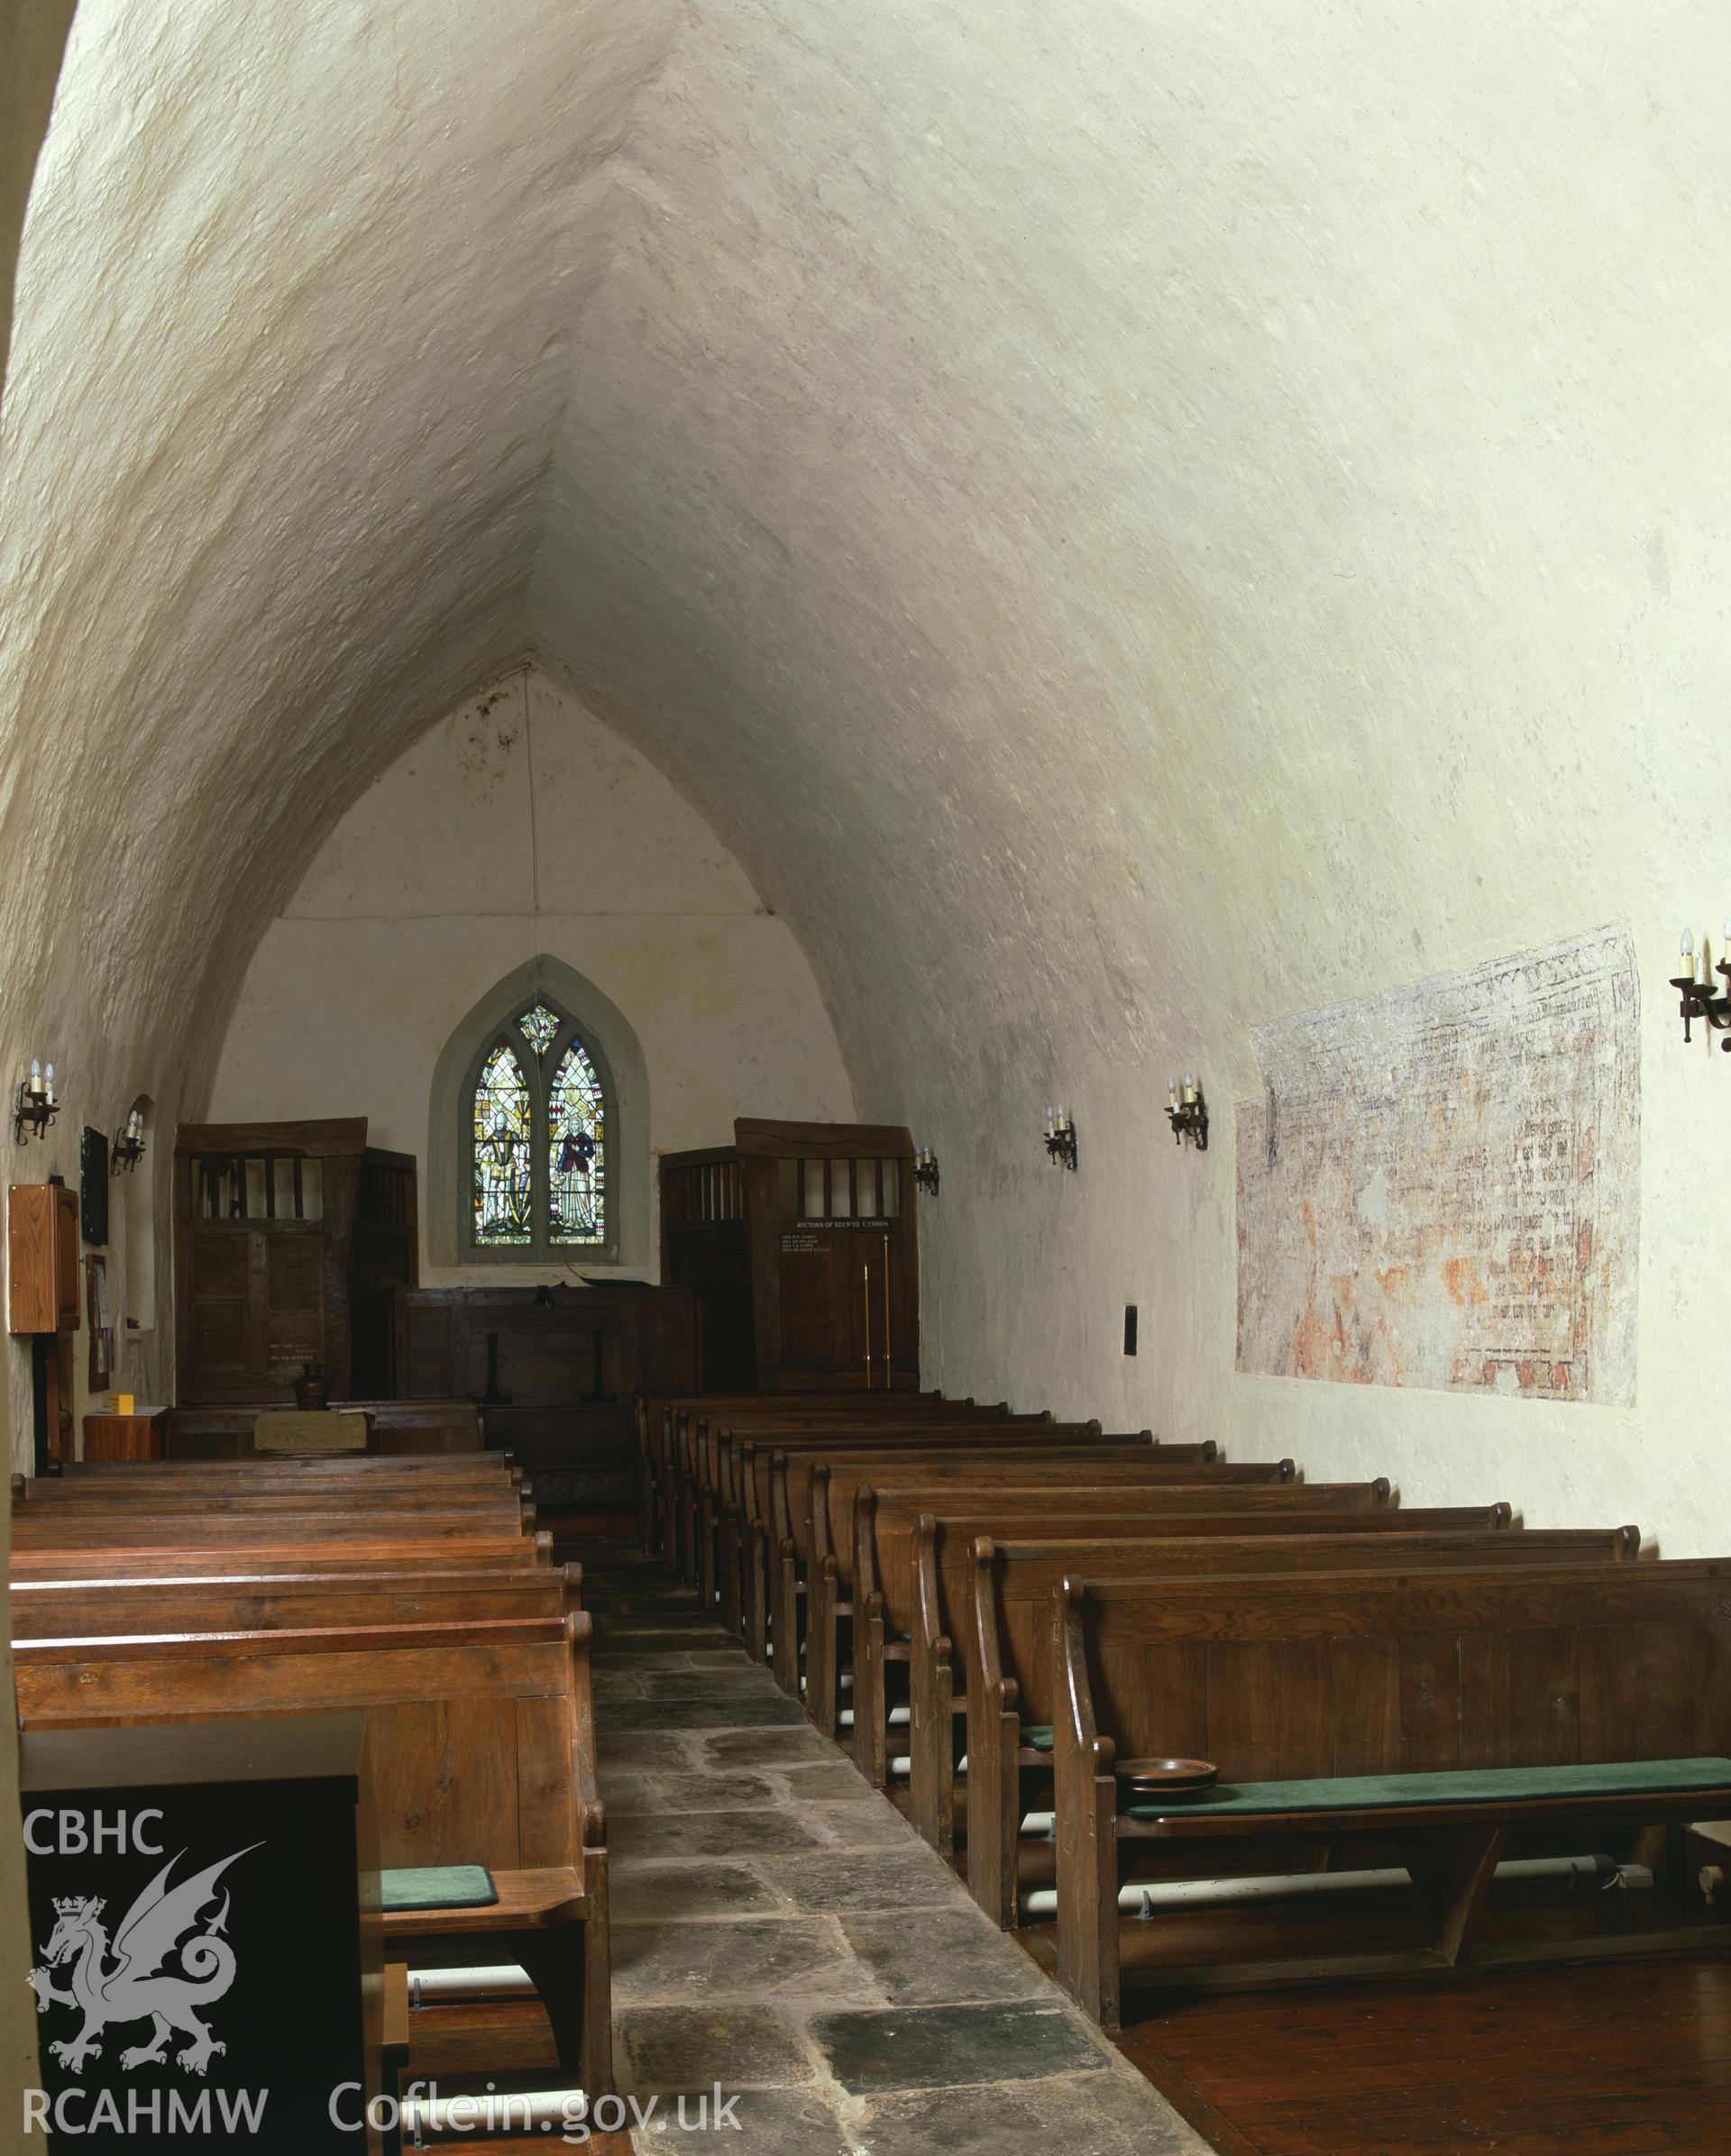 Colour transparency showing St Margaret's Church, Eglwyscumin taken by Iain Wright, 2005.